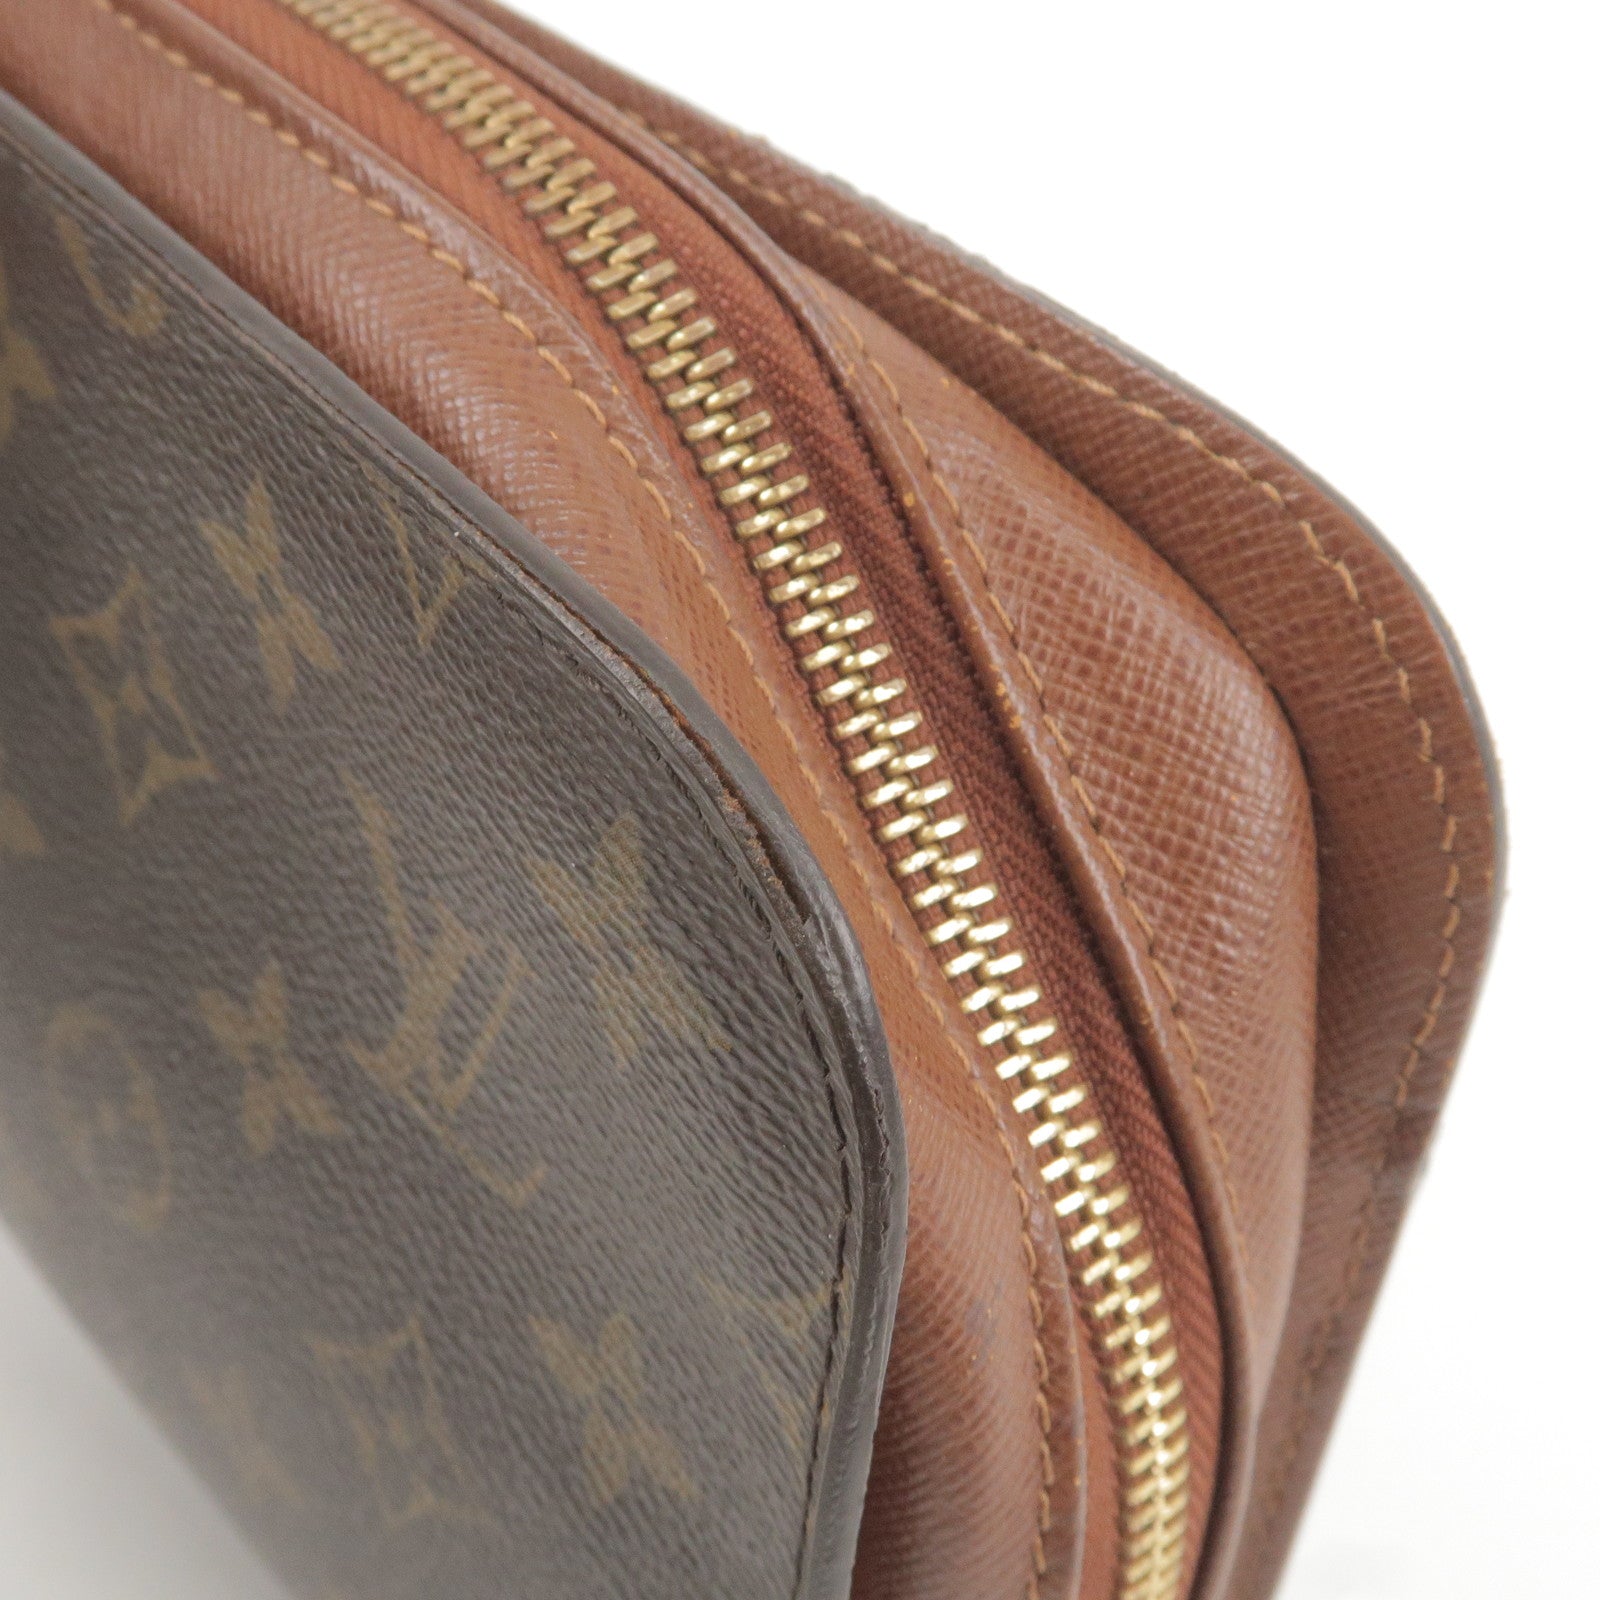 Louis Vuitton 2003 Pre-owned Orsay Clutch Bag - Brown